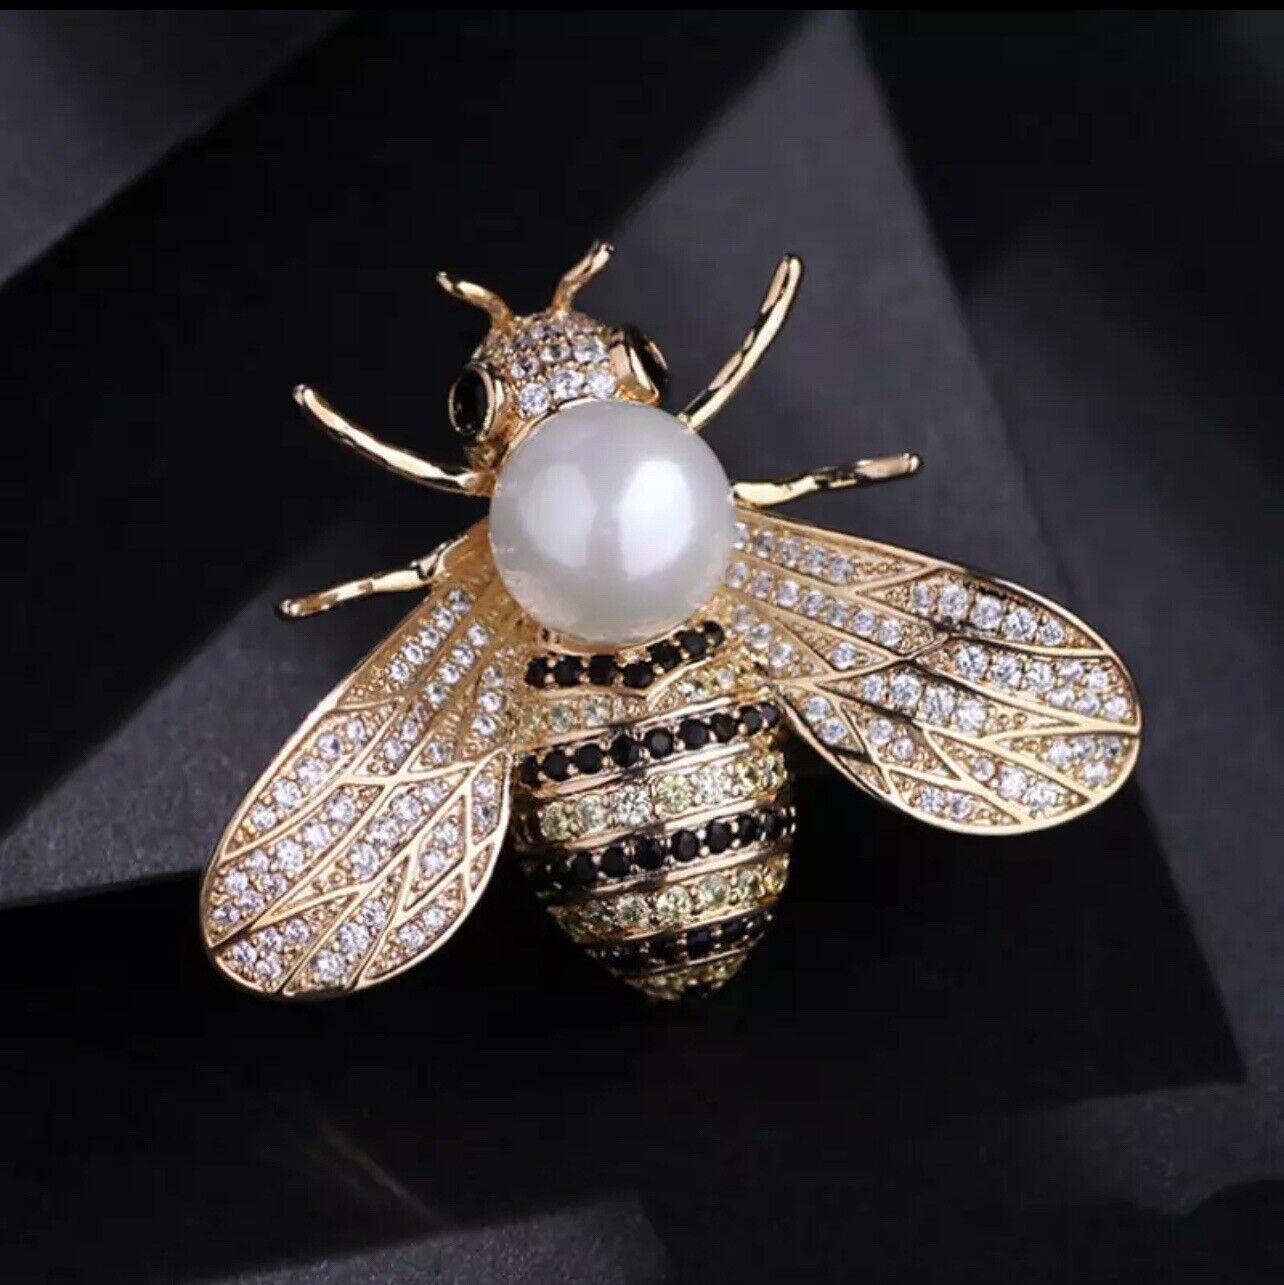 Black-Tailed Queen Bee with Pearl